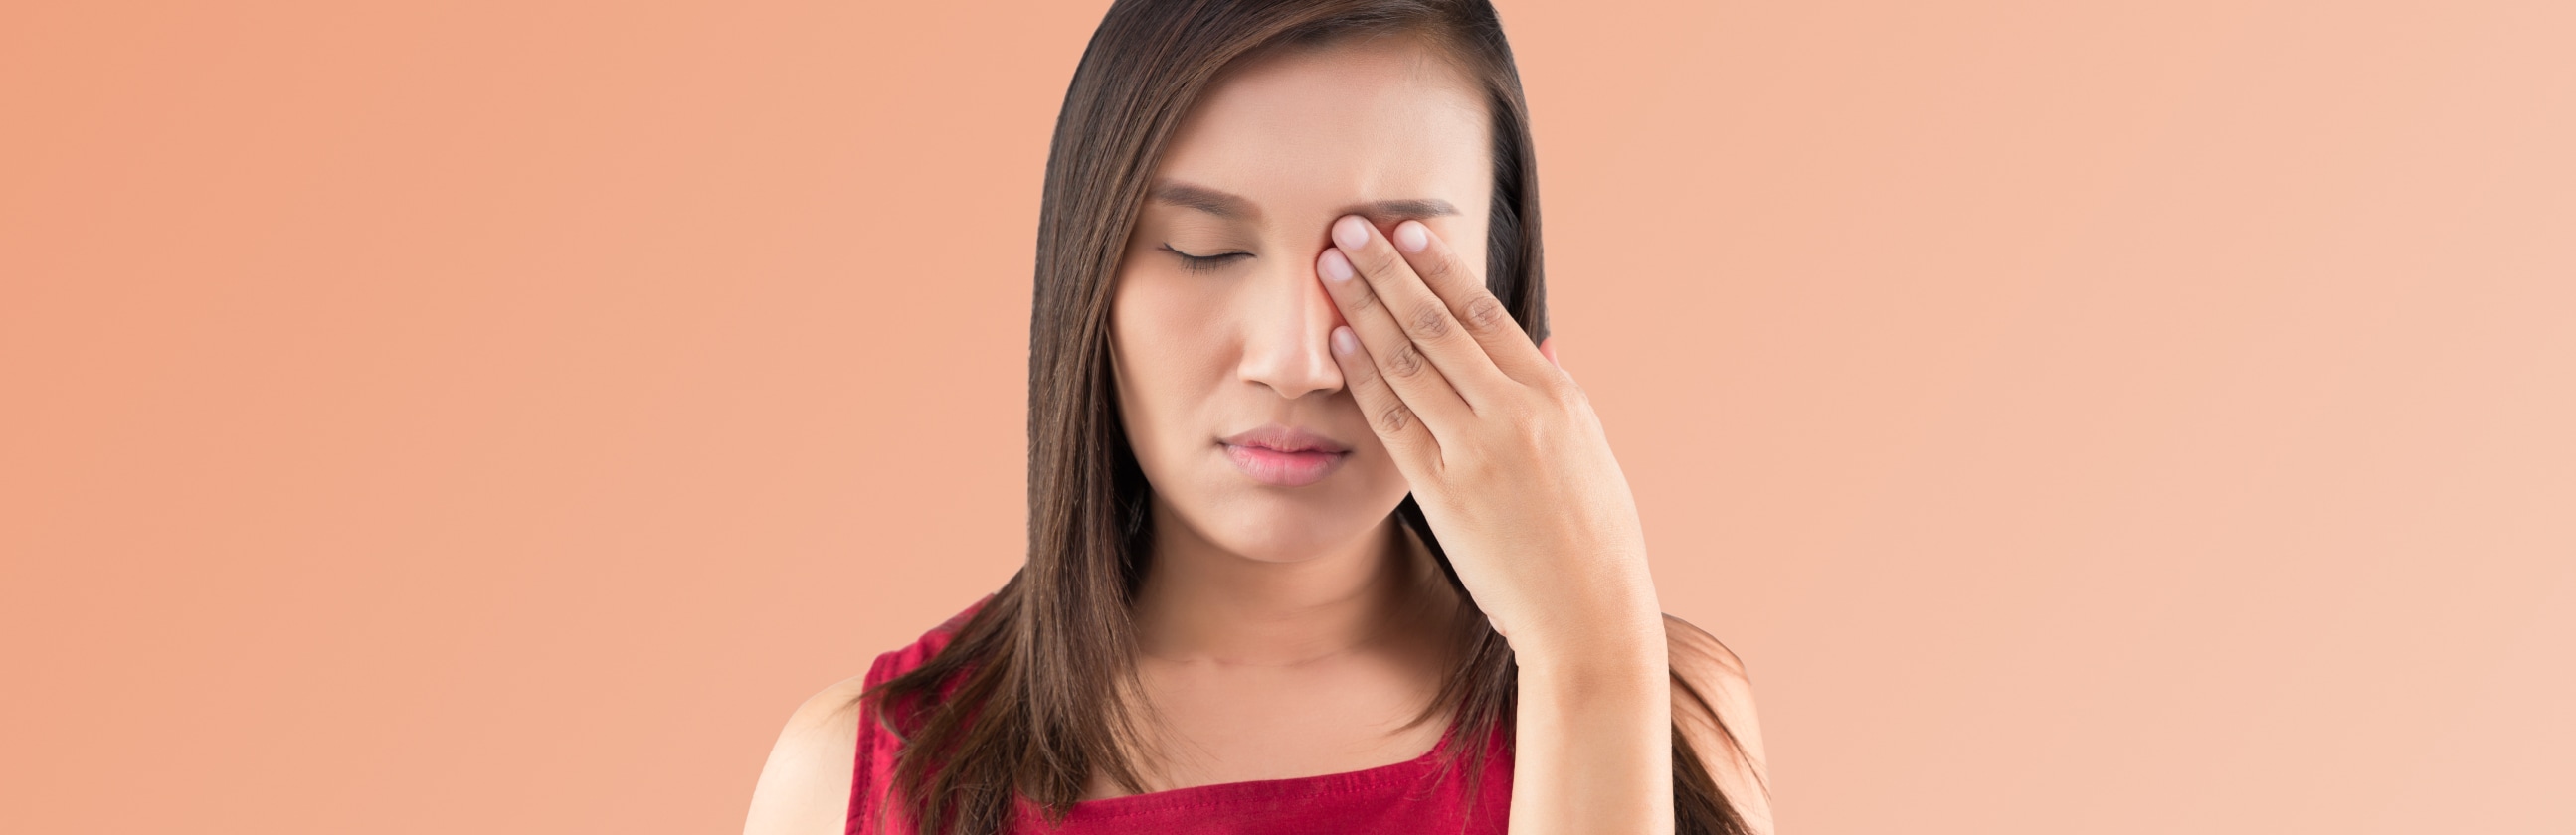 Contact Lens Stuck in Eye: Causes and Remedies